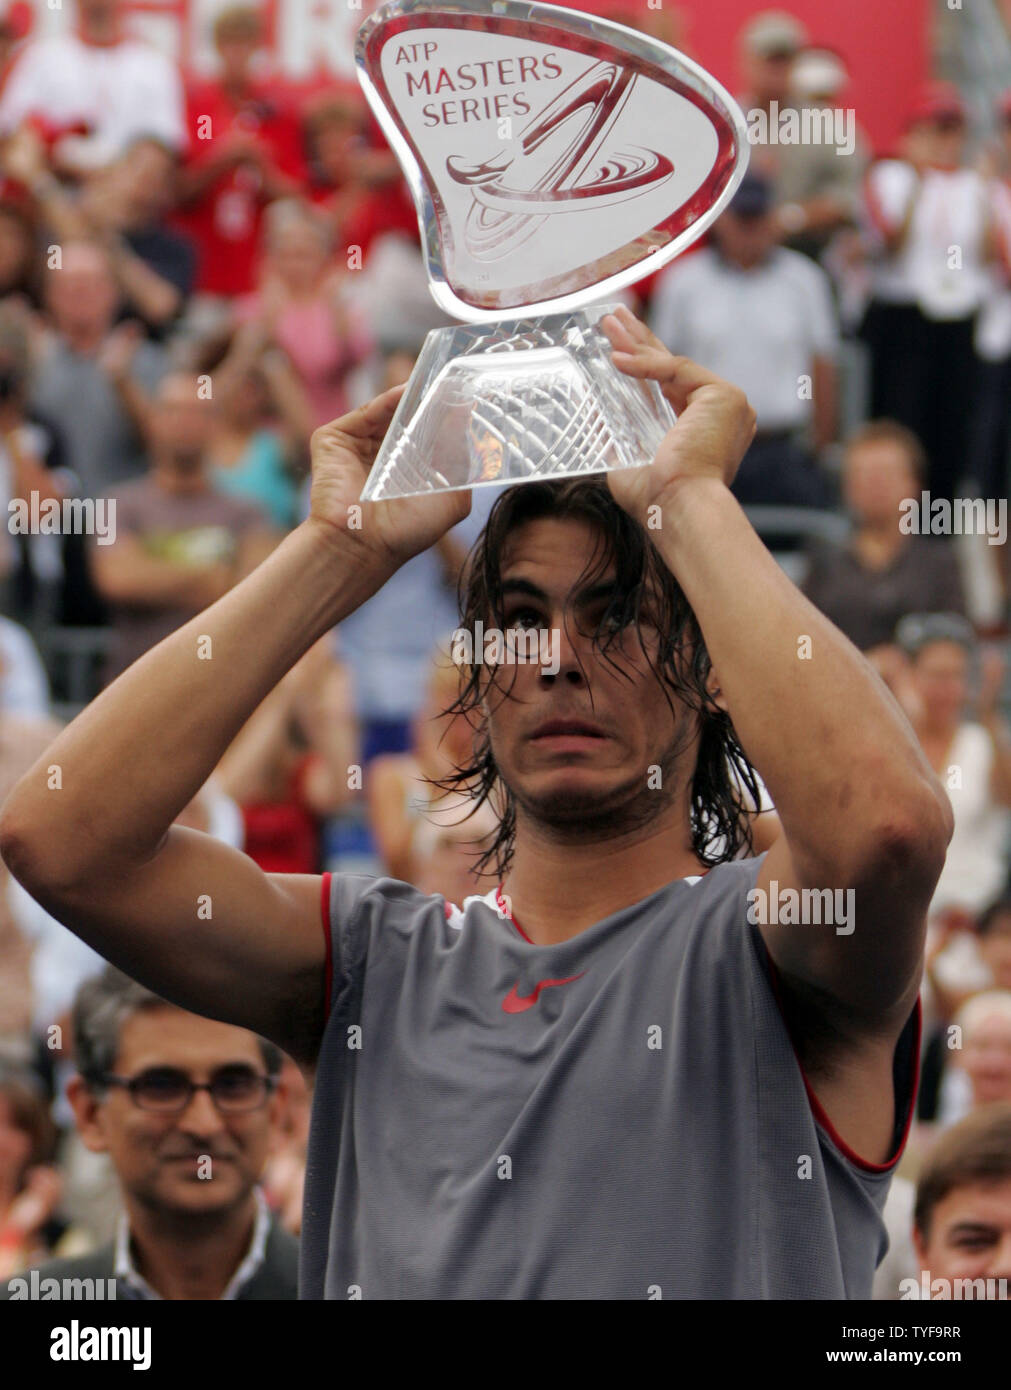 Spain's Rafael Nadal hoists his trophy after winning the Rogers Cup men's tennis  ATP masters series tournament in Montreal on August 14, 2005. Nadal,19, won  the final match against American Andre Agassi